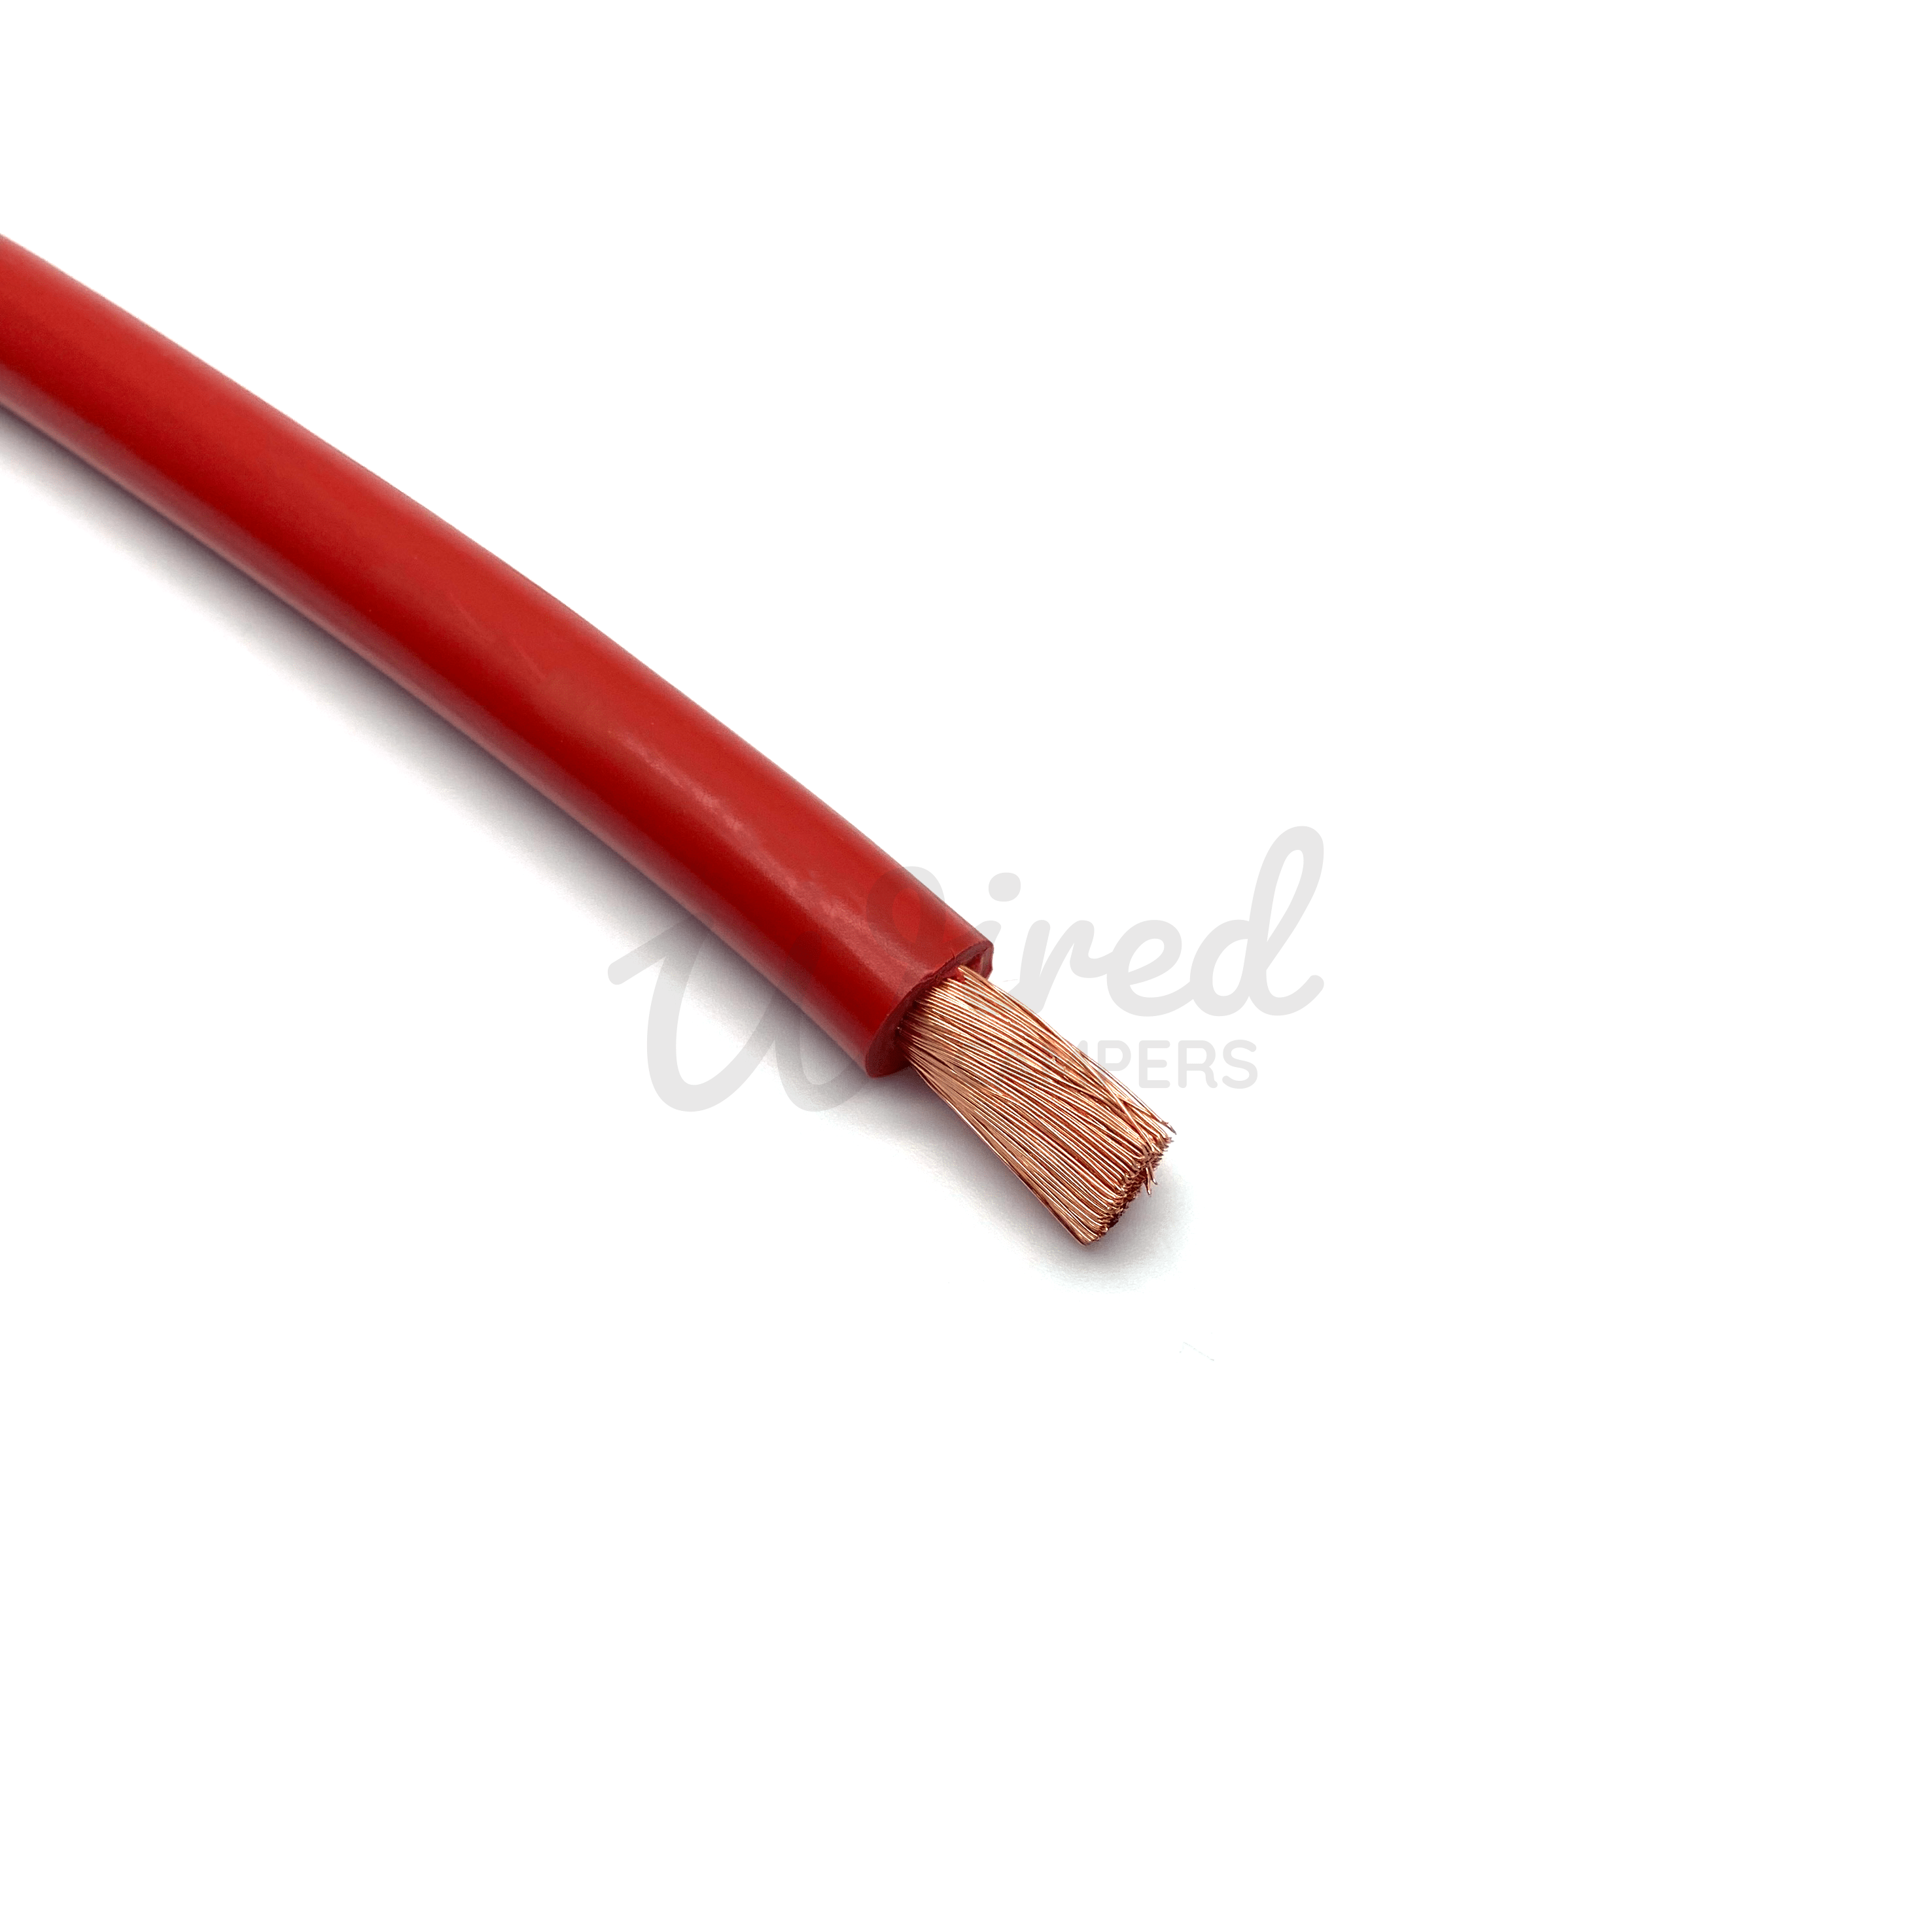 Wired Campers Limited 50M - 10mm² 70A Hi-Flex Battery/Welding/Inverter Flexible Cable - Red Positive